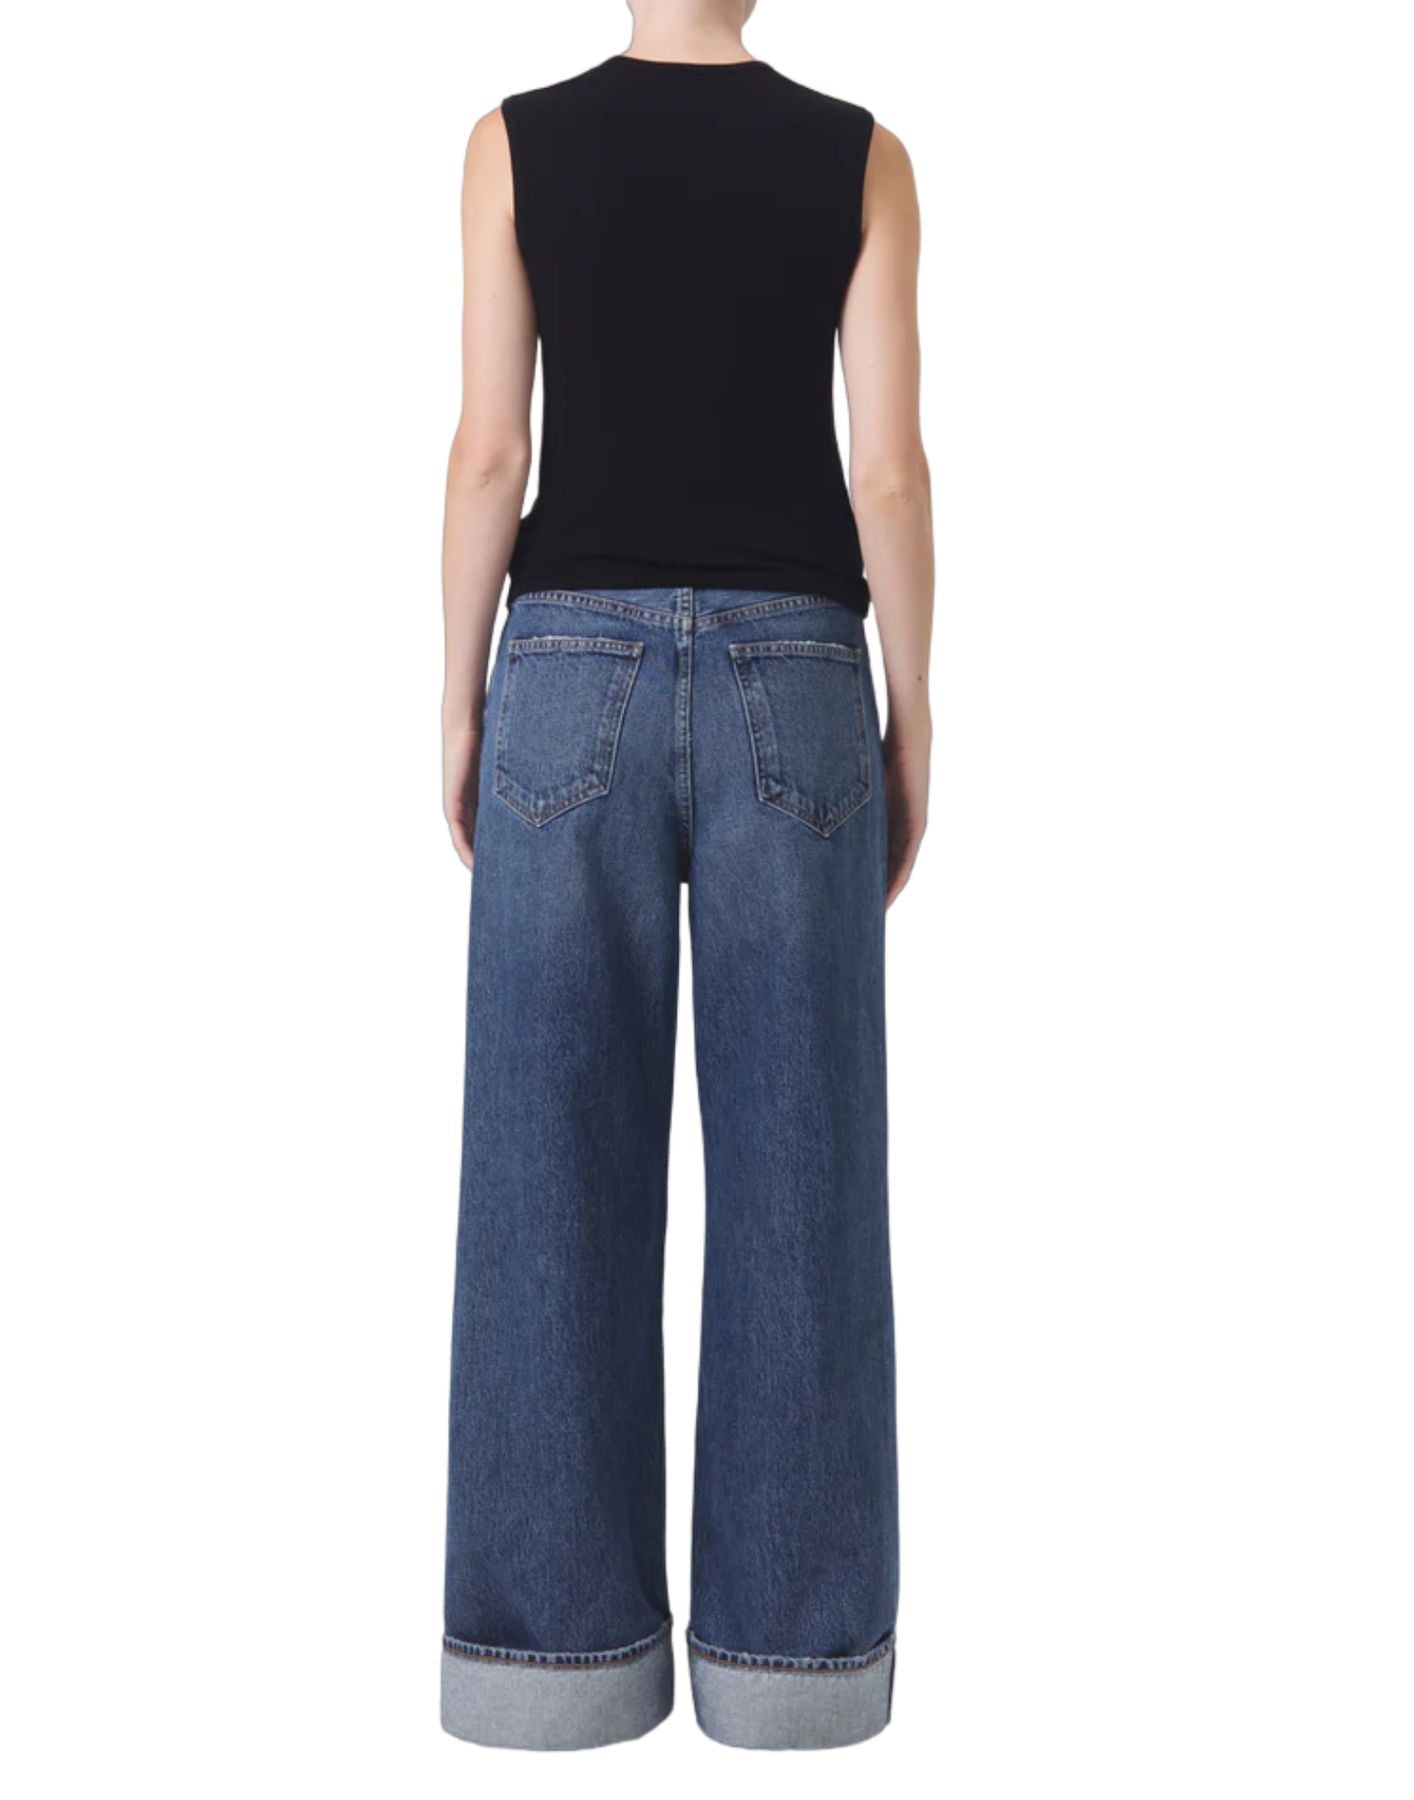 Jeans woman A9159 1206 CONTROL Agolde